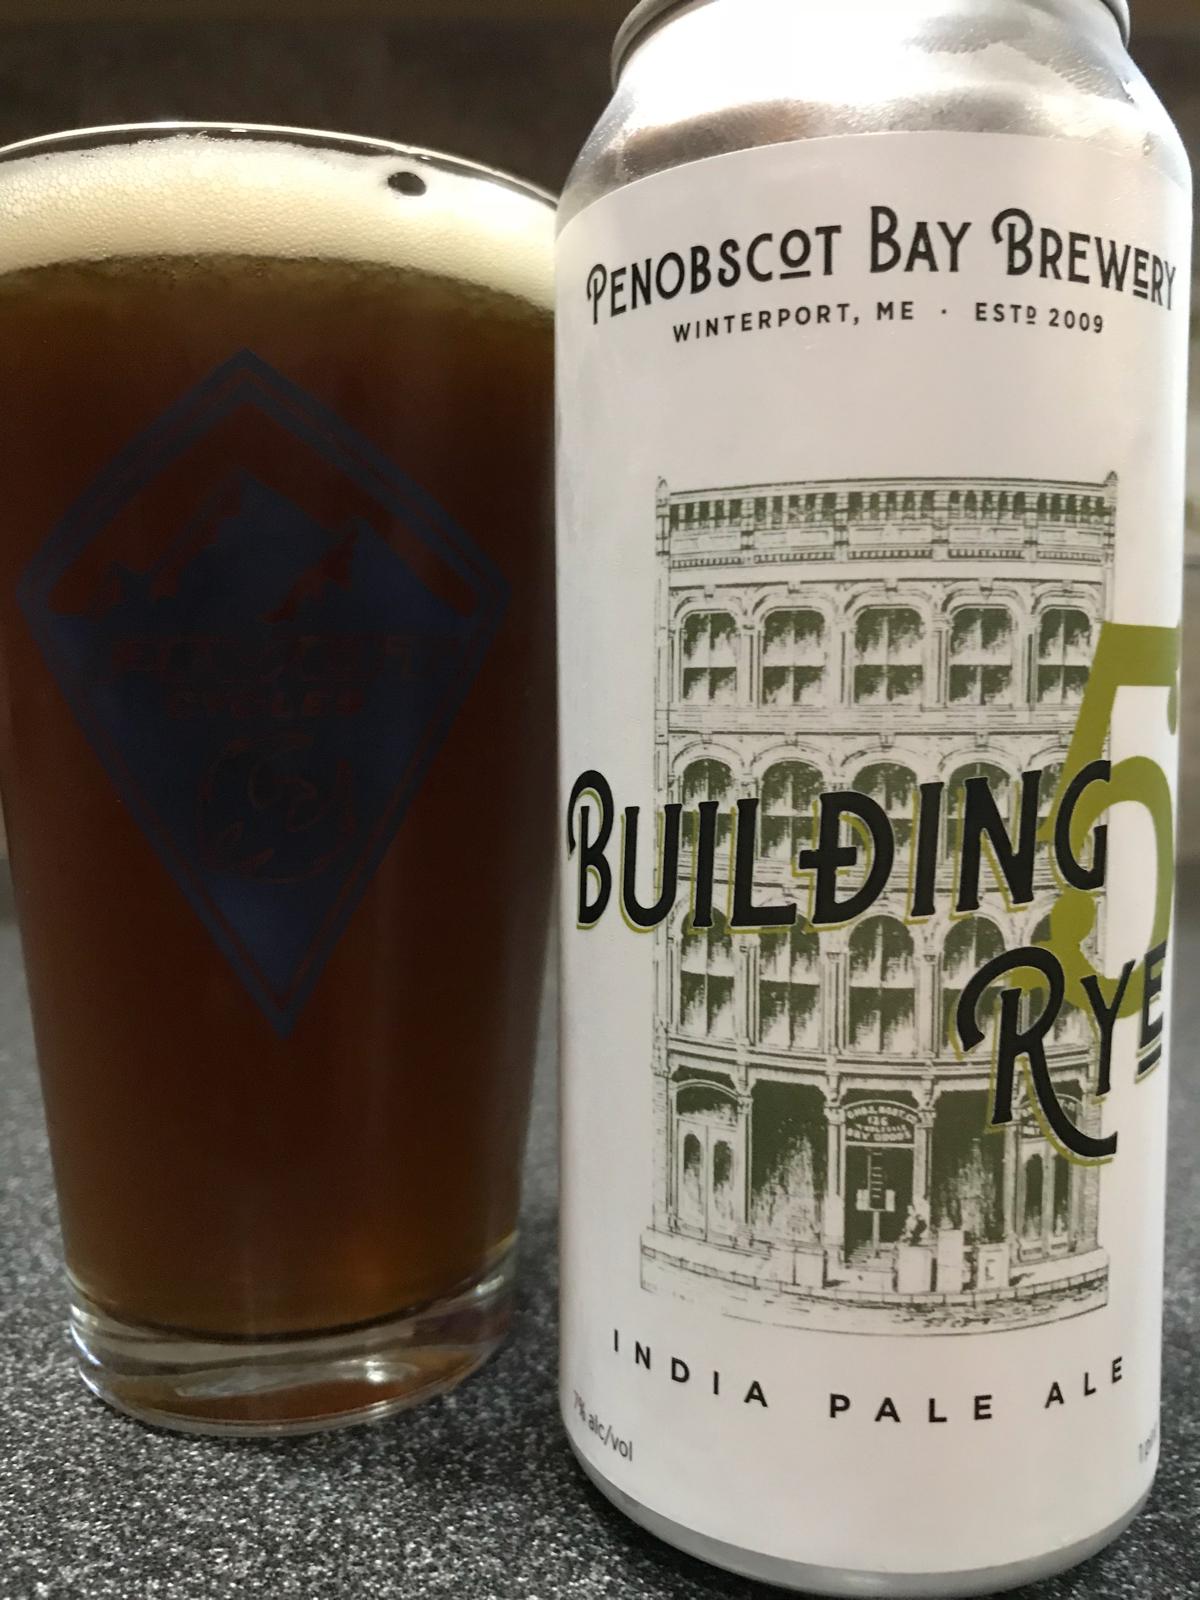 Building 5 Rye India Pale Ale